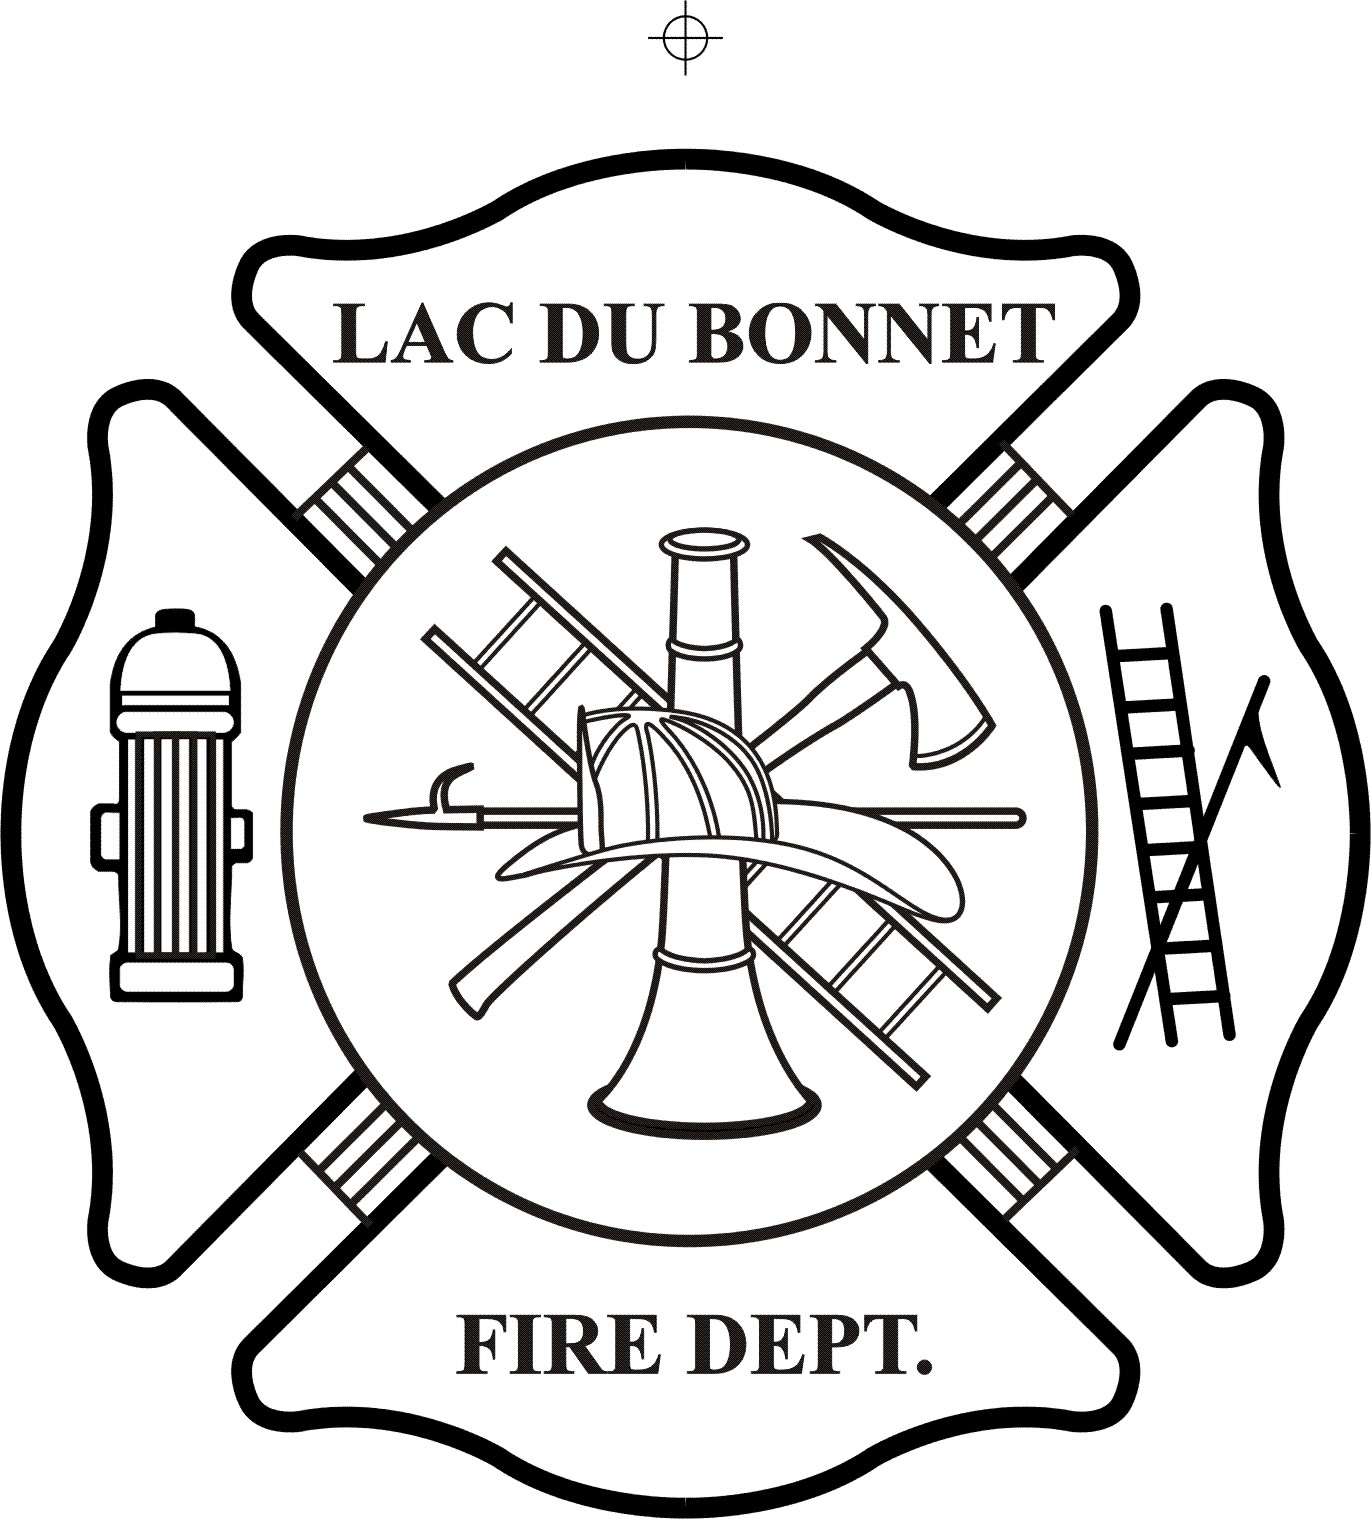 Firefighter  black and white fire department symbols clip art